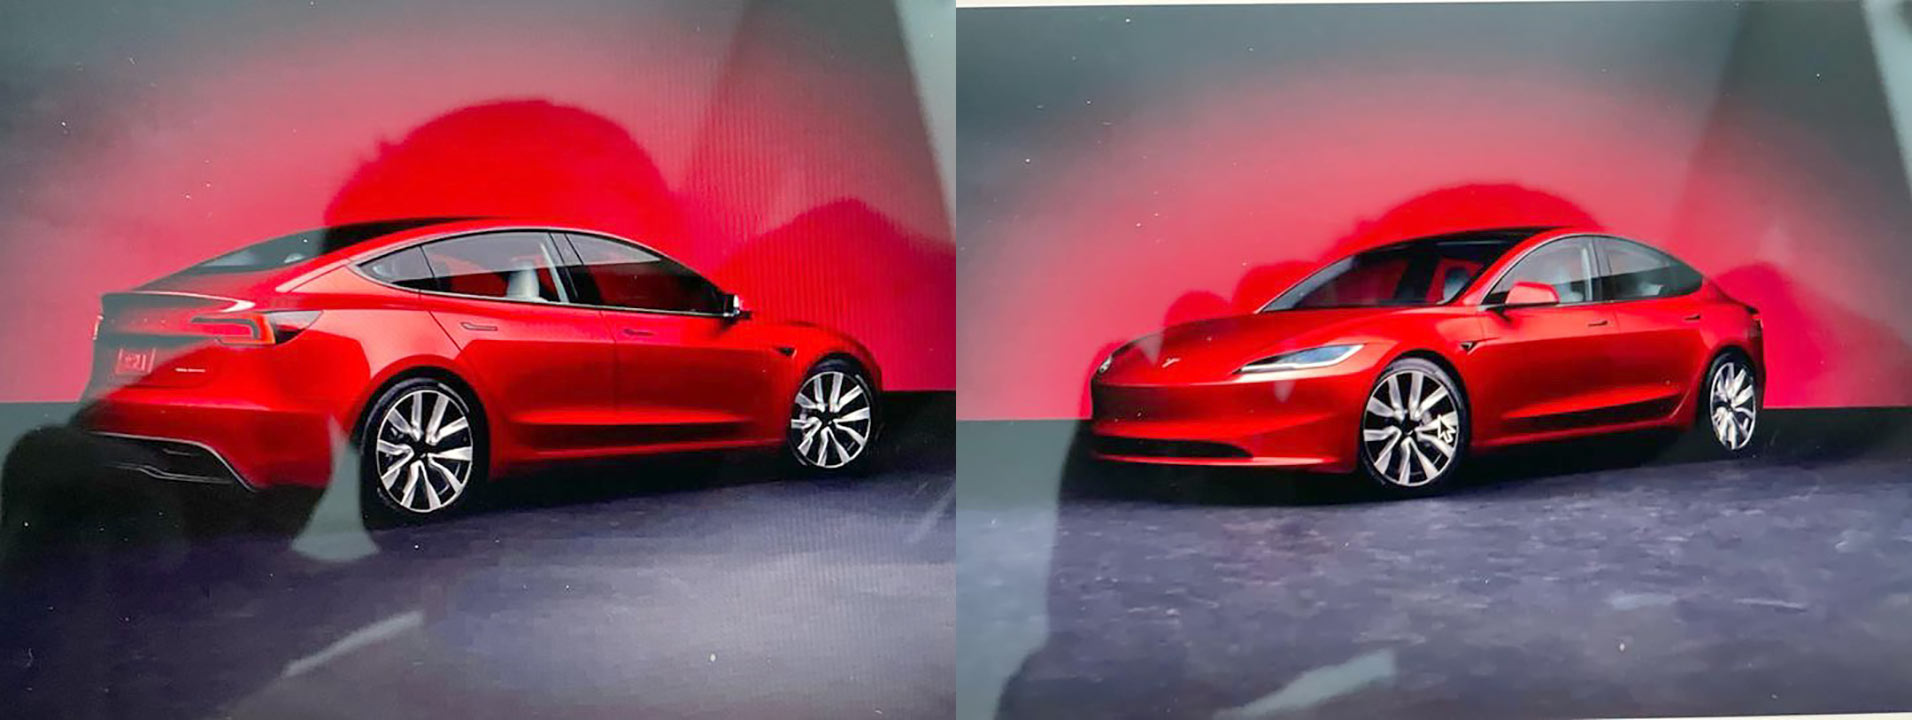 Rumors suggest Tesla plans to reveal Project Highland Tesla Model 3  tomorrow, alleged photos leak ahead, prototypes spotted across Europe -  Tesla Oracle